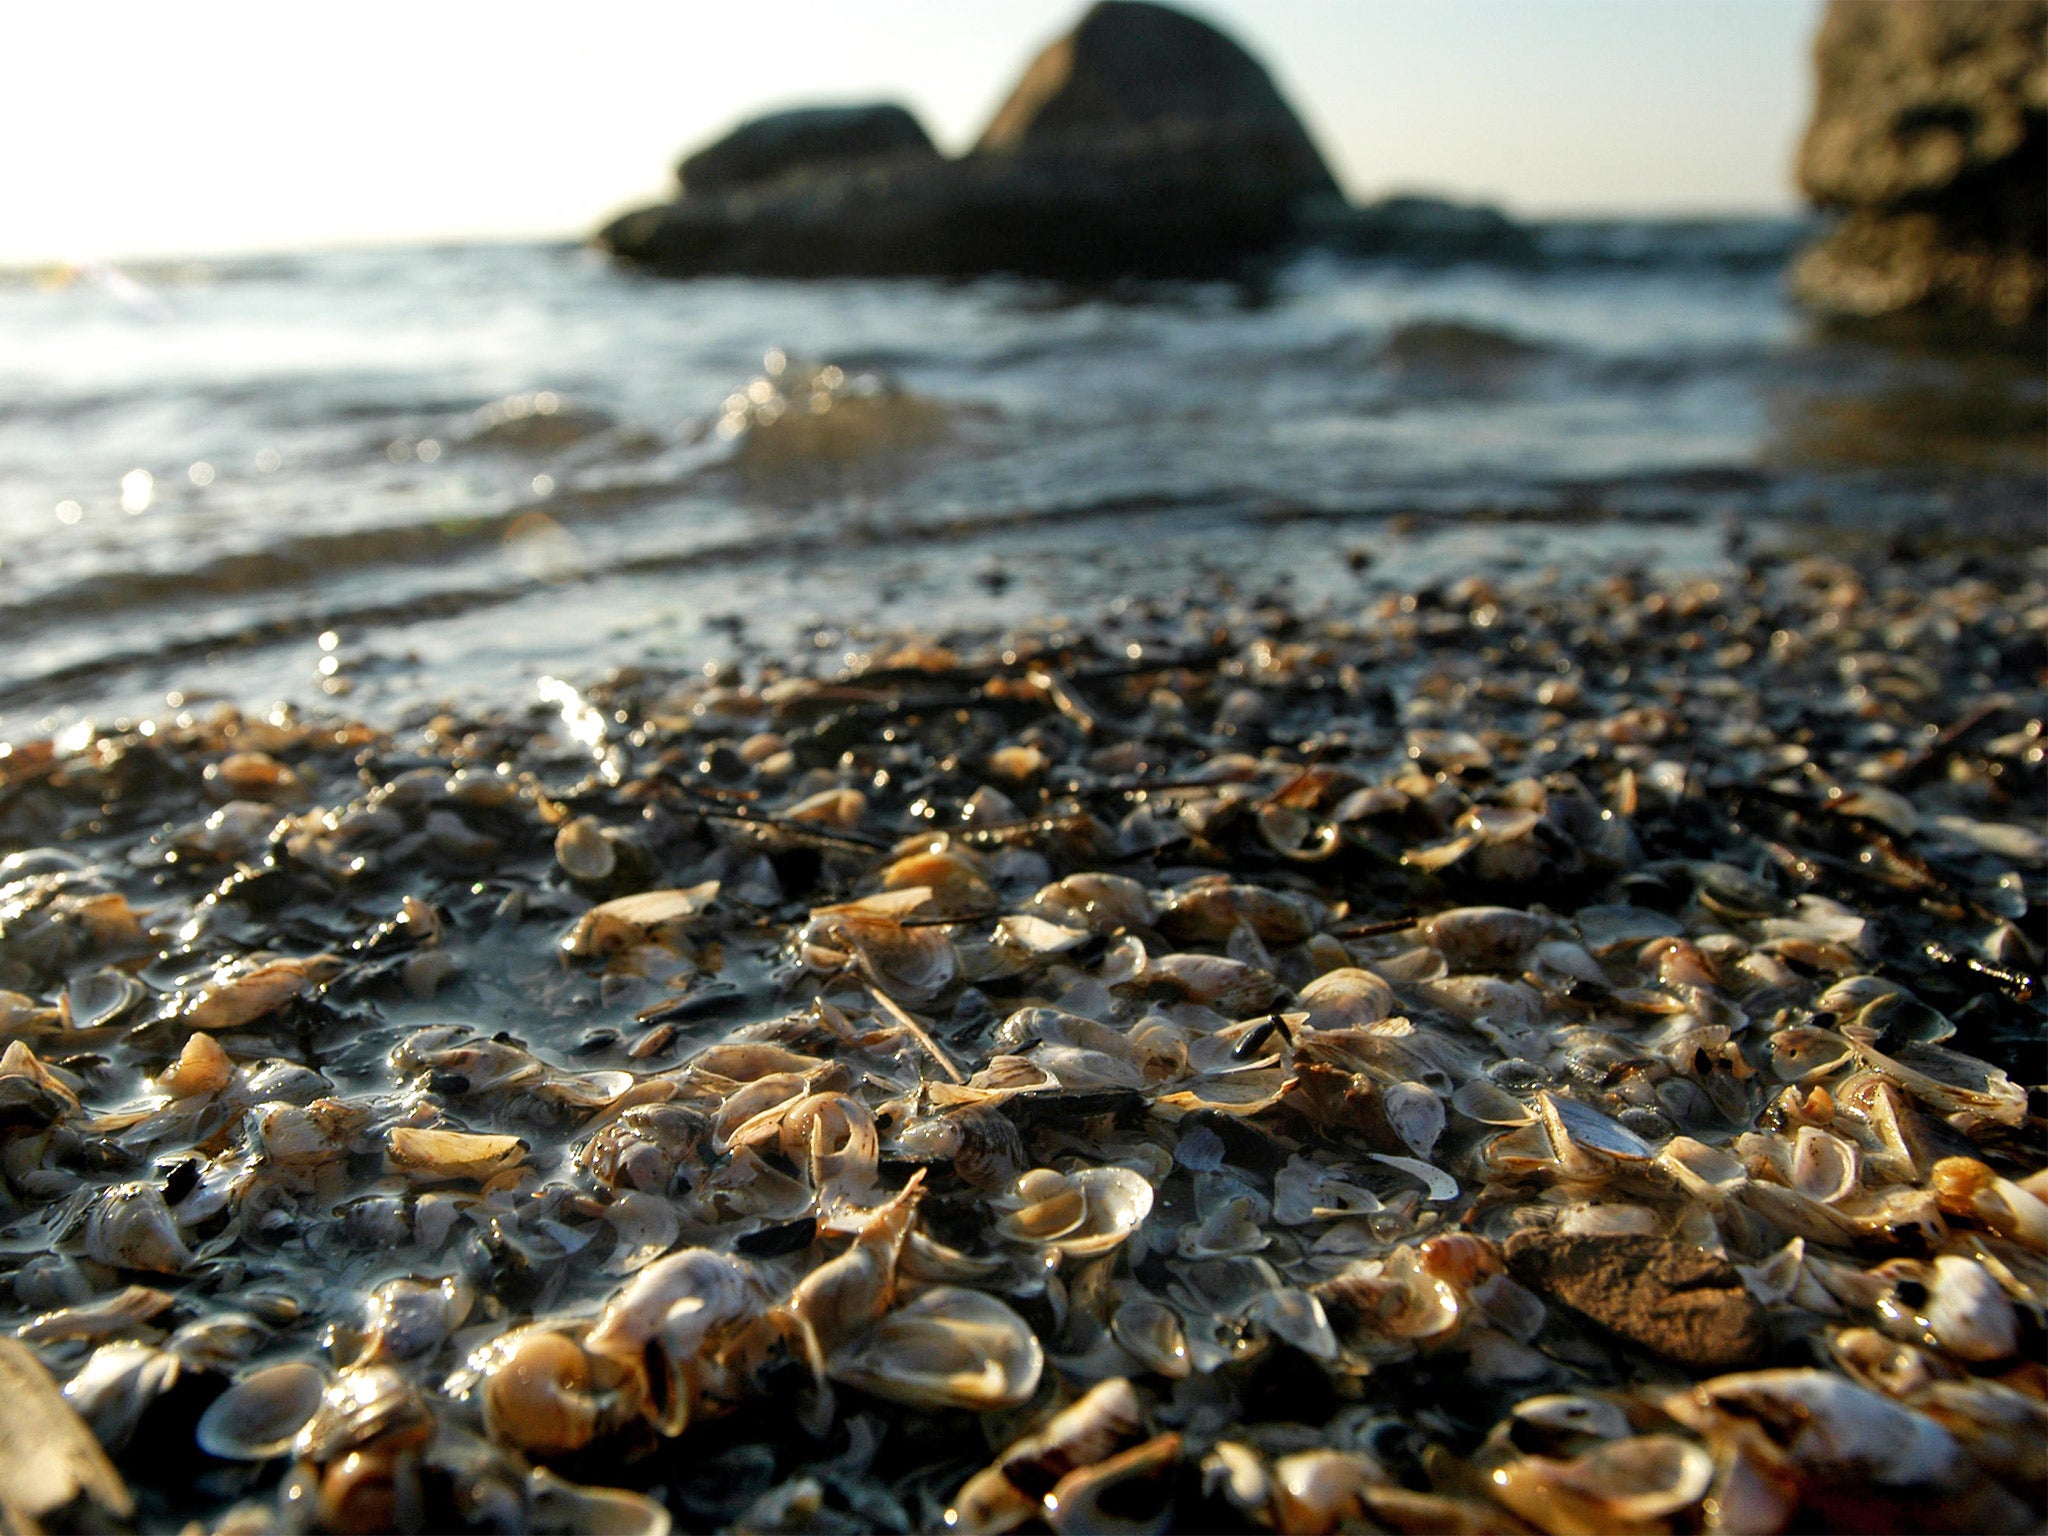 Quagga mussel shells are expected to arrive in the next few years